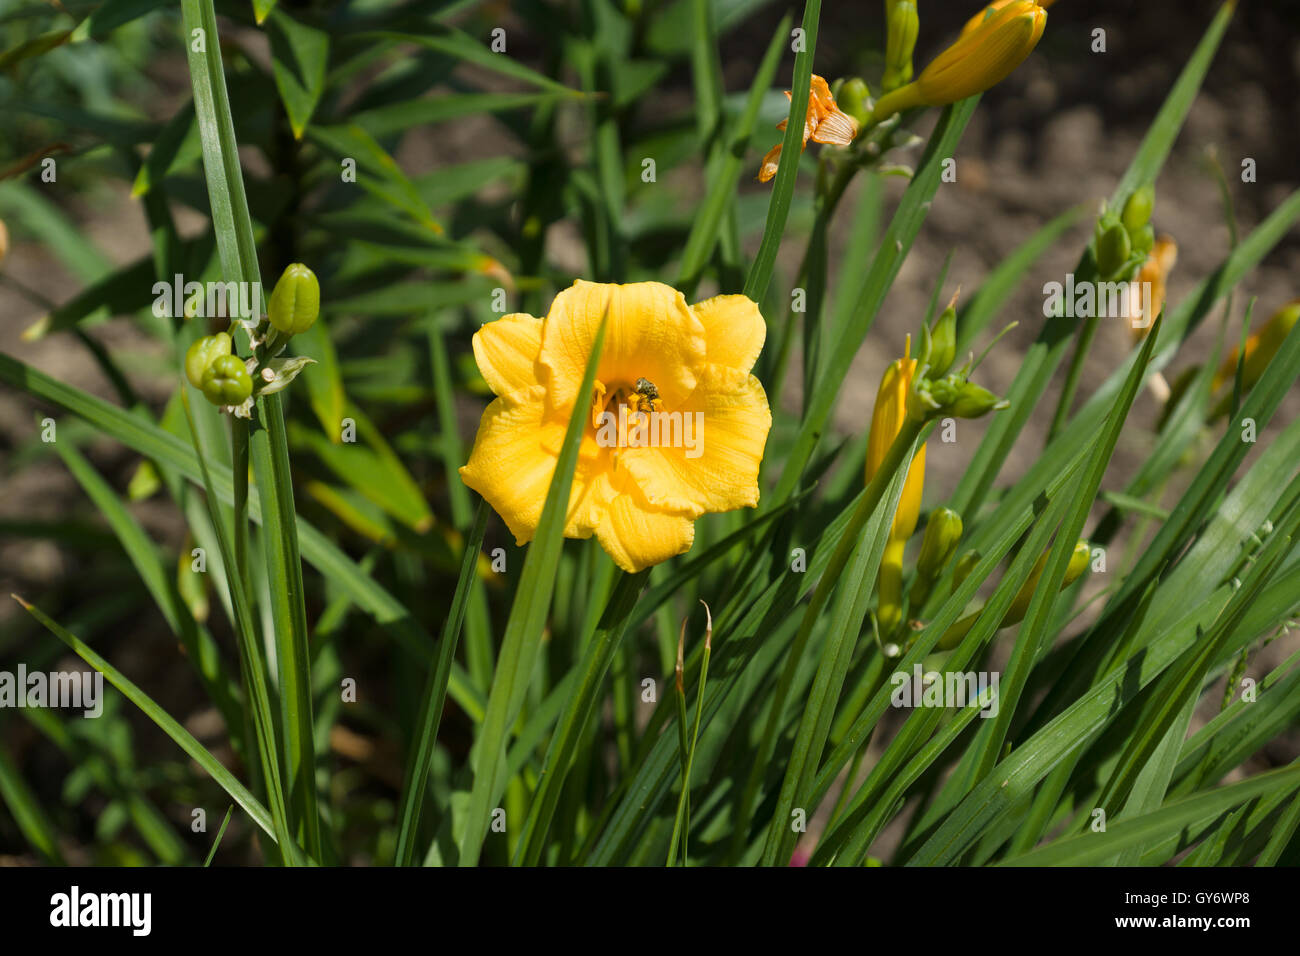 the yellow flower bloomed among the green grass Stock Photo